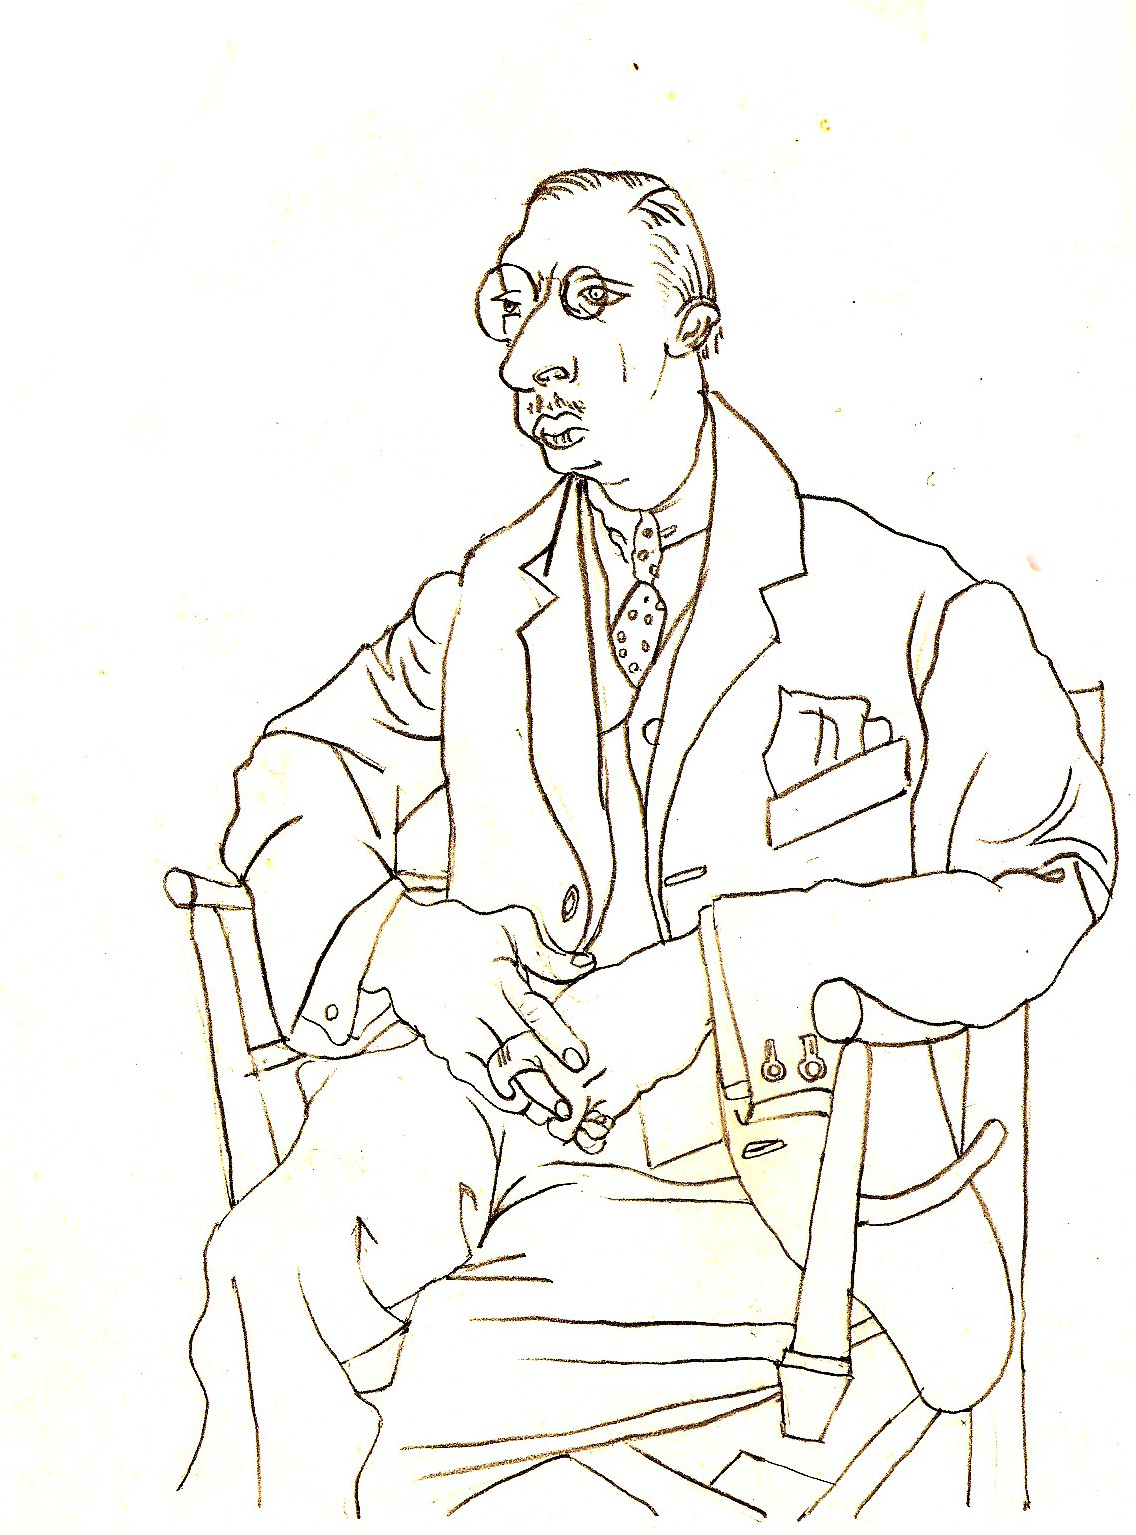 Stravinsky, drawn by Picasso in 1920.